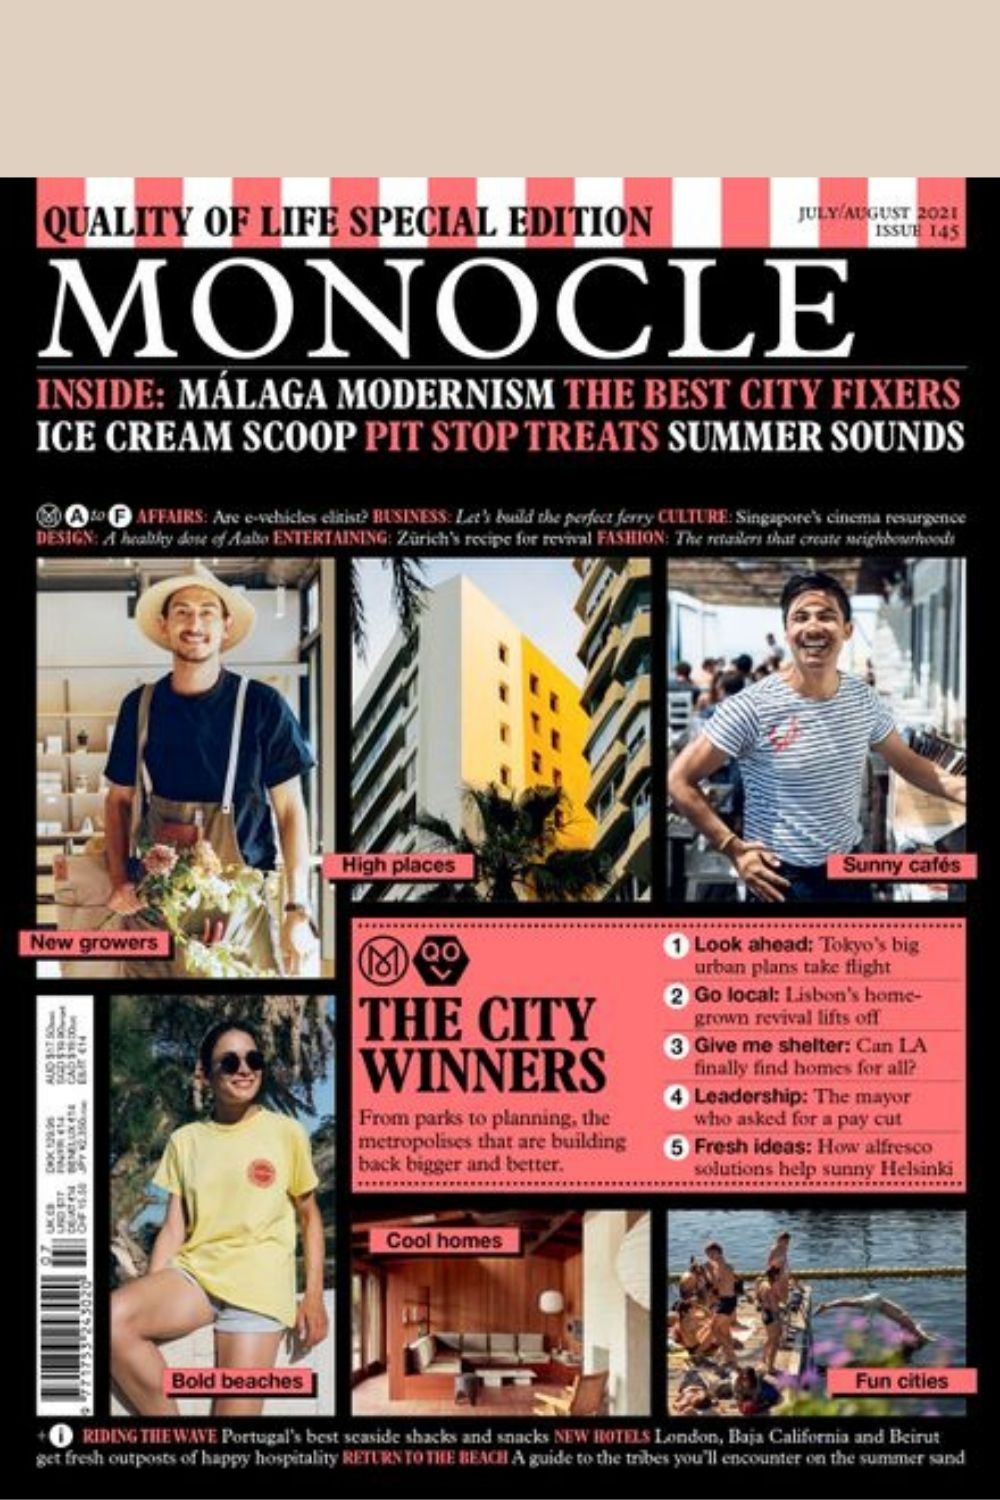 Front cover of Monocle magazine Issue 145